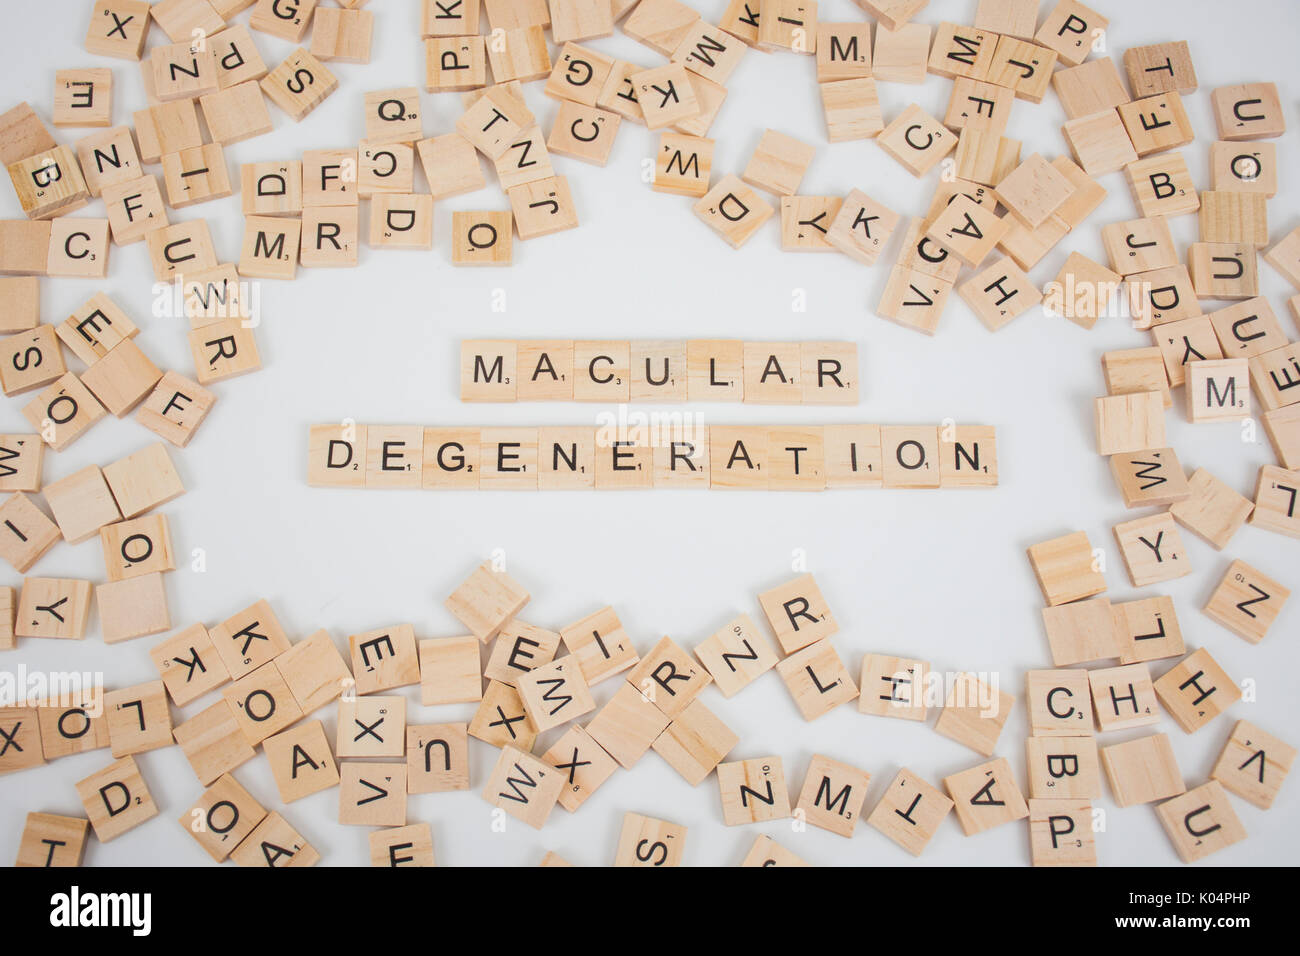 Macular degeneration spelled out in scrabble letters Stock Photo